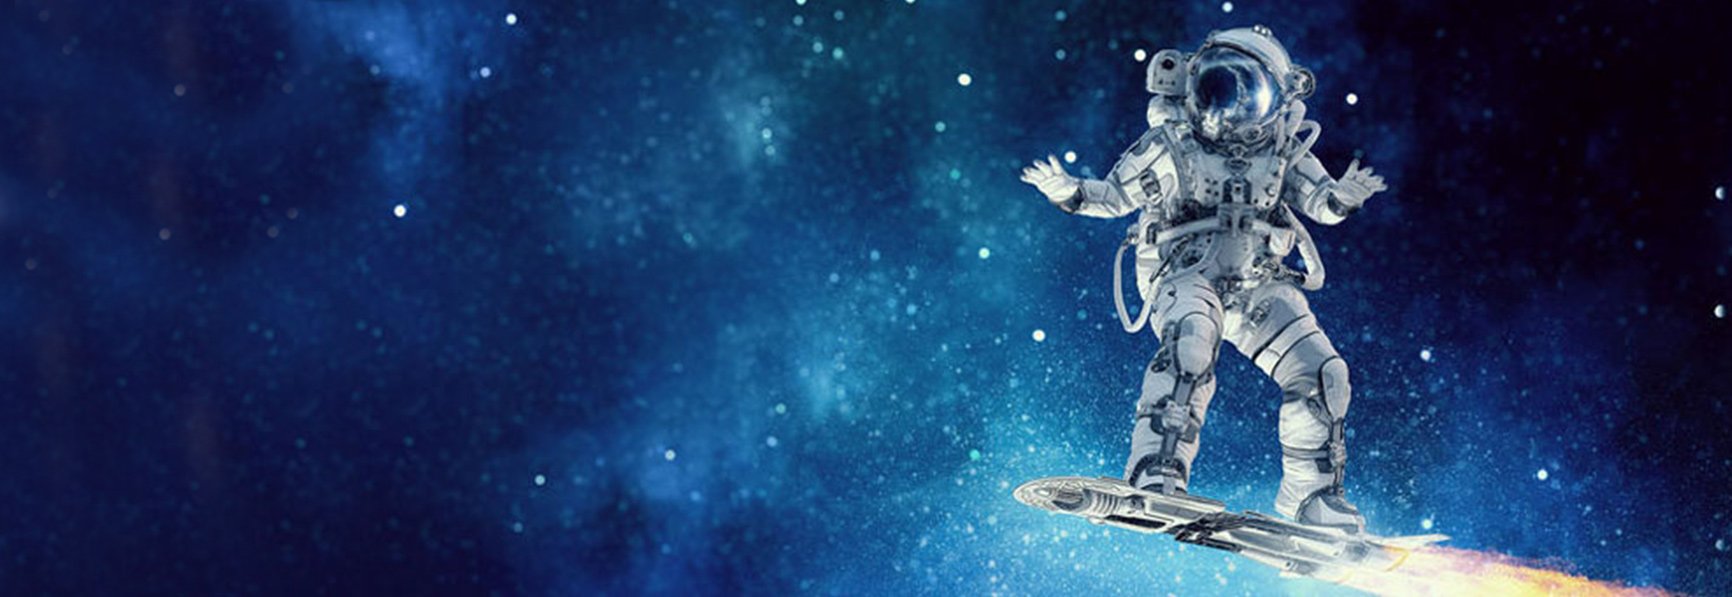 astronaut riding a board in space